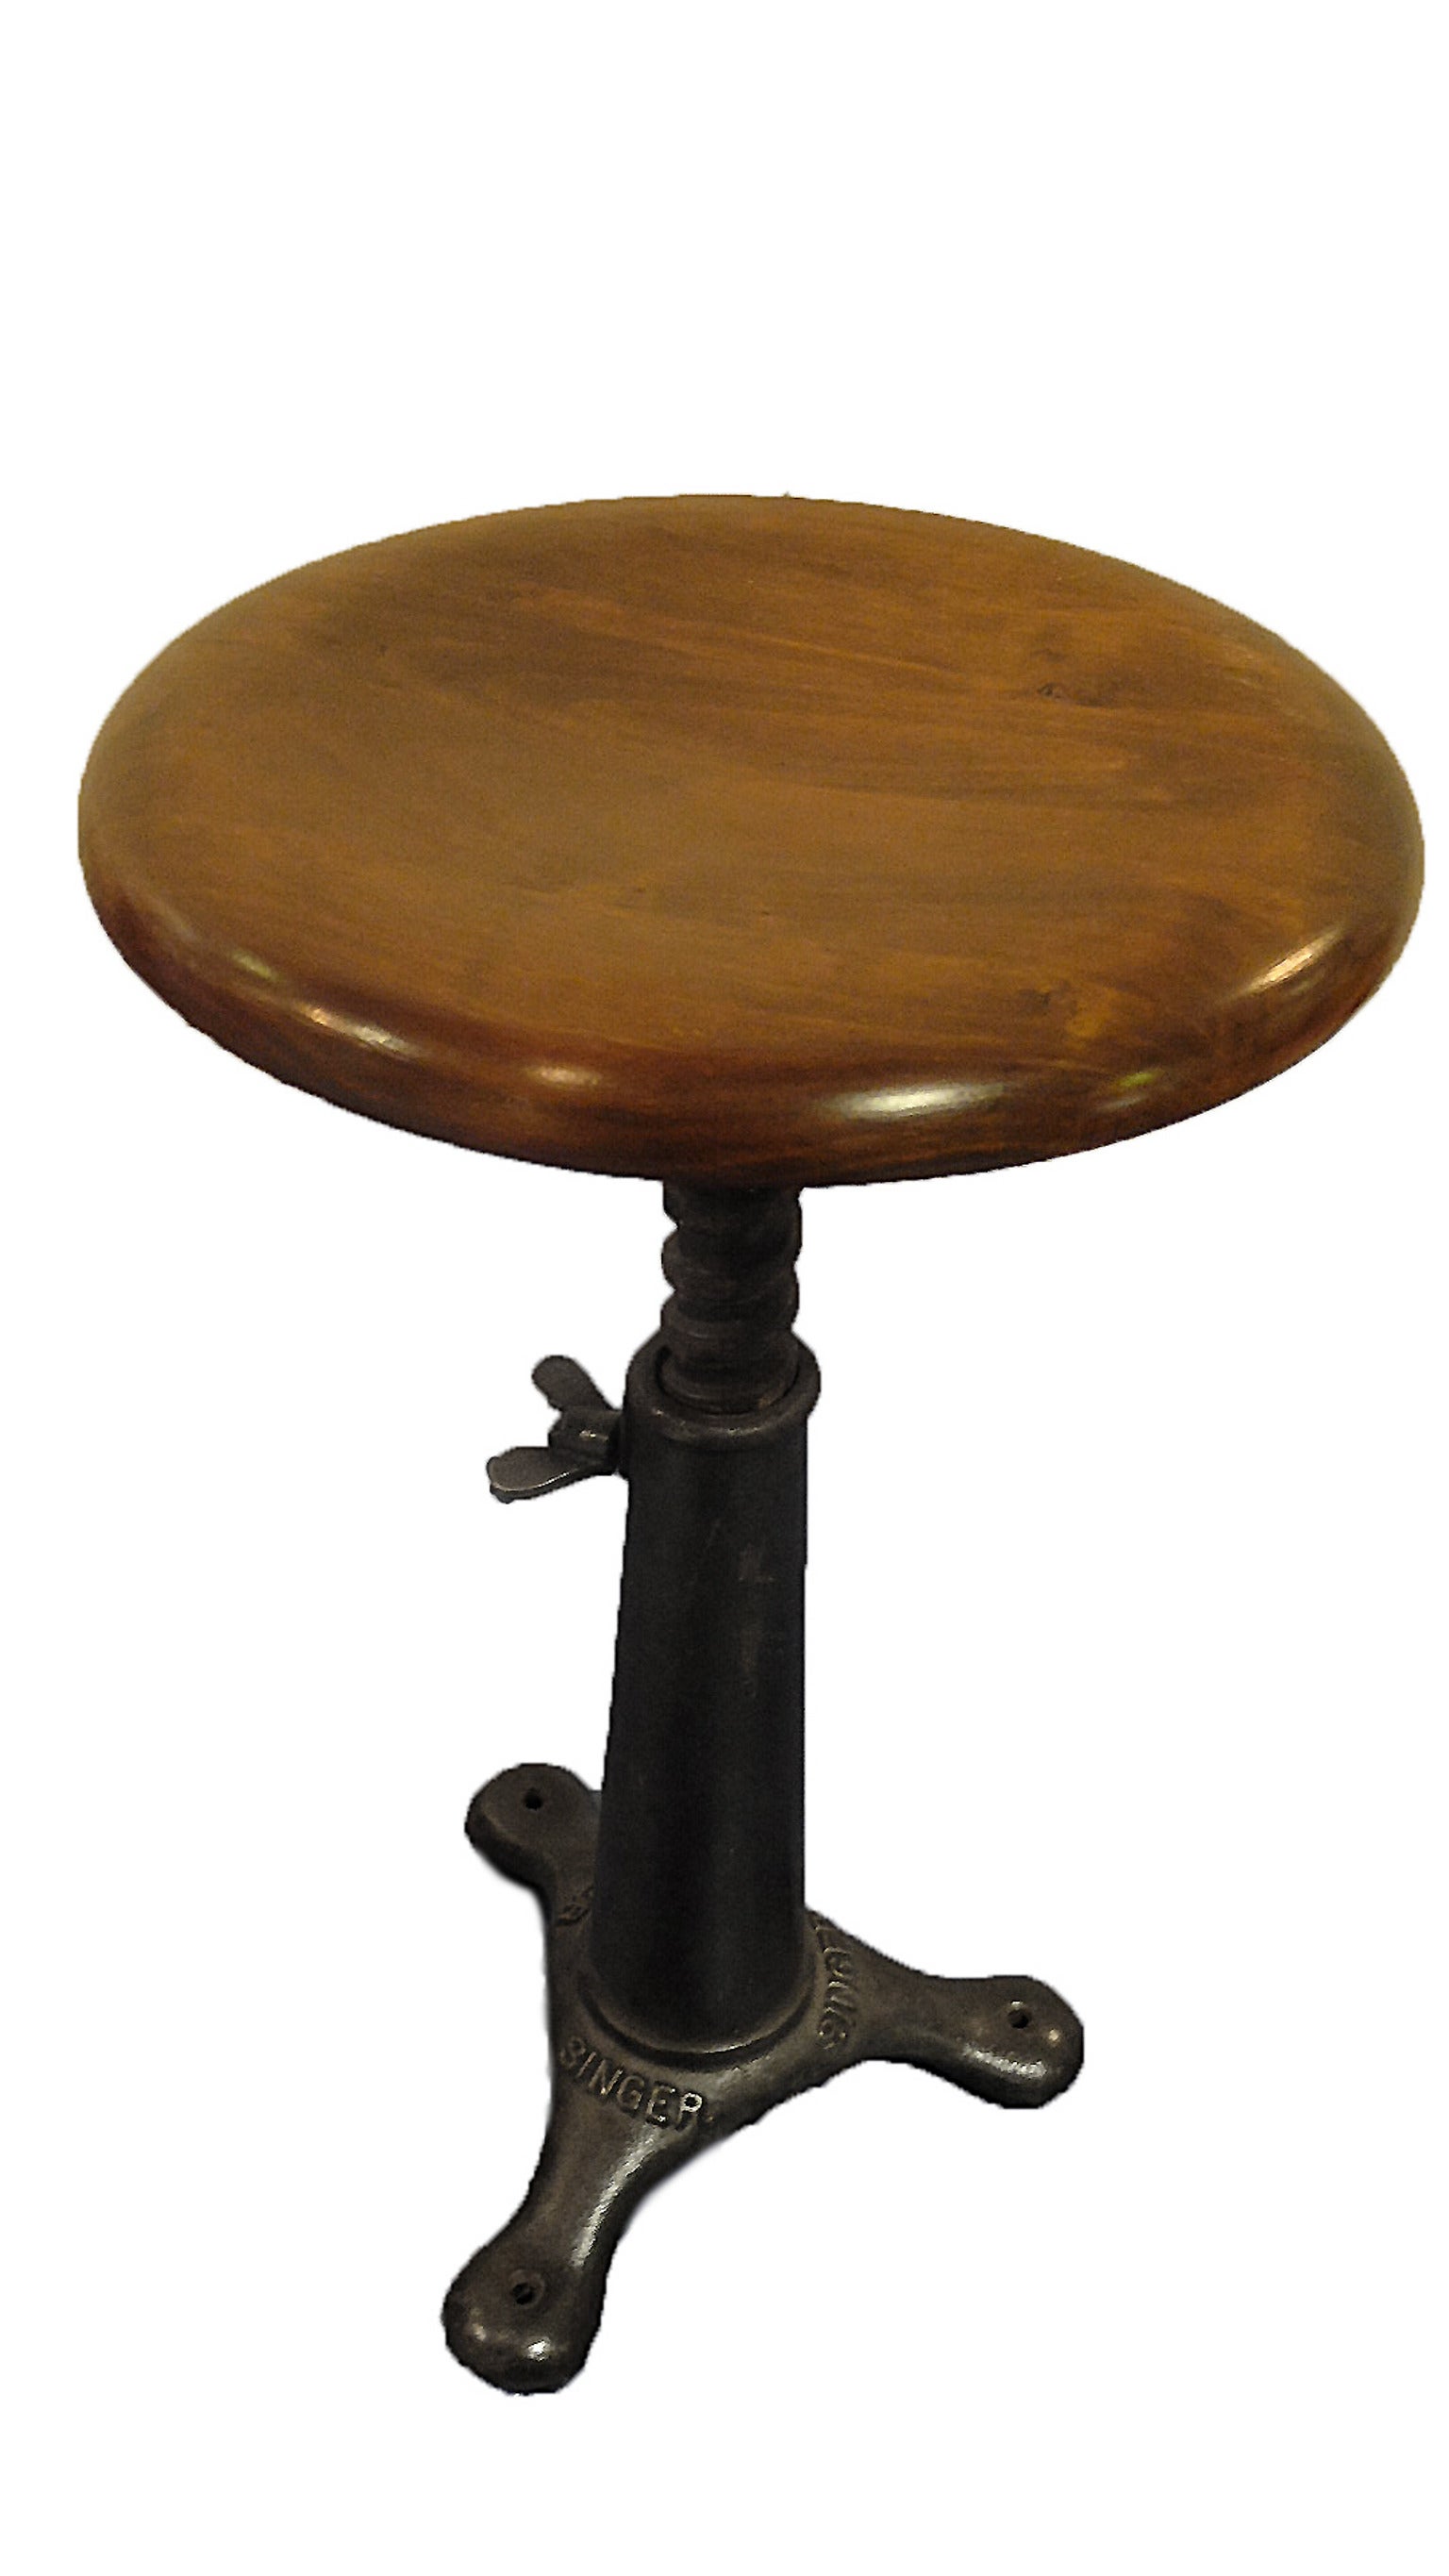 Singer industrial stool, made out of cast iron leg and wooden sit.